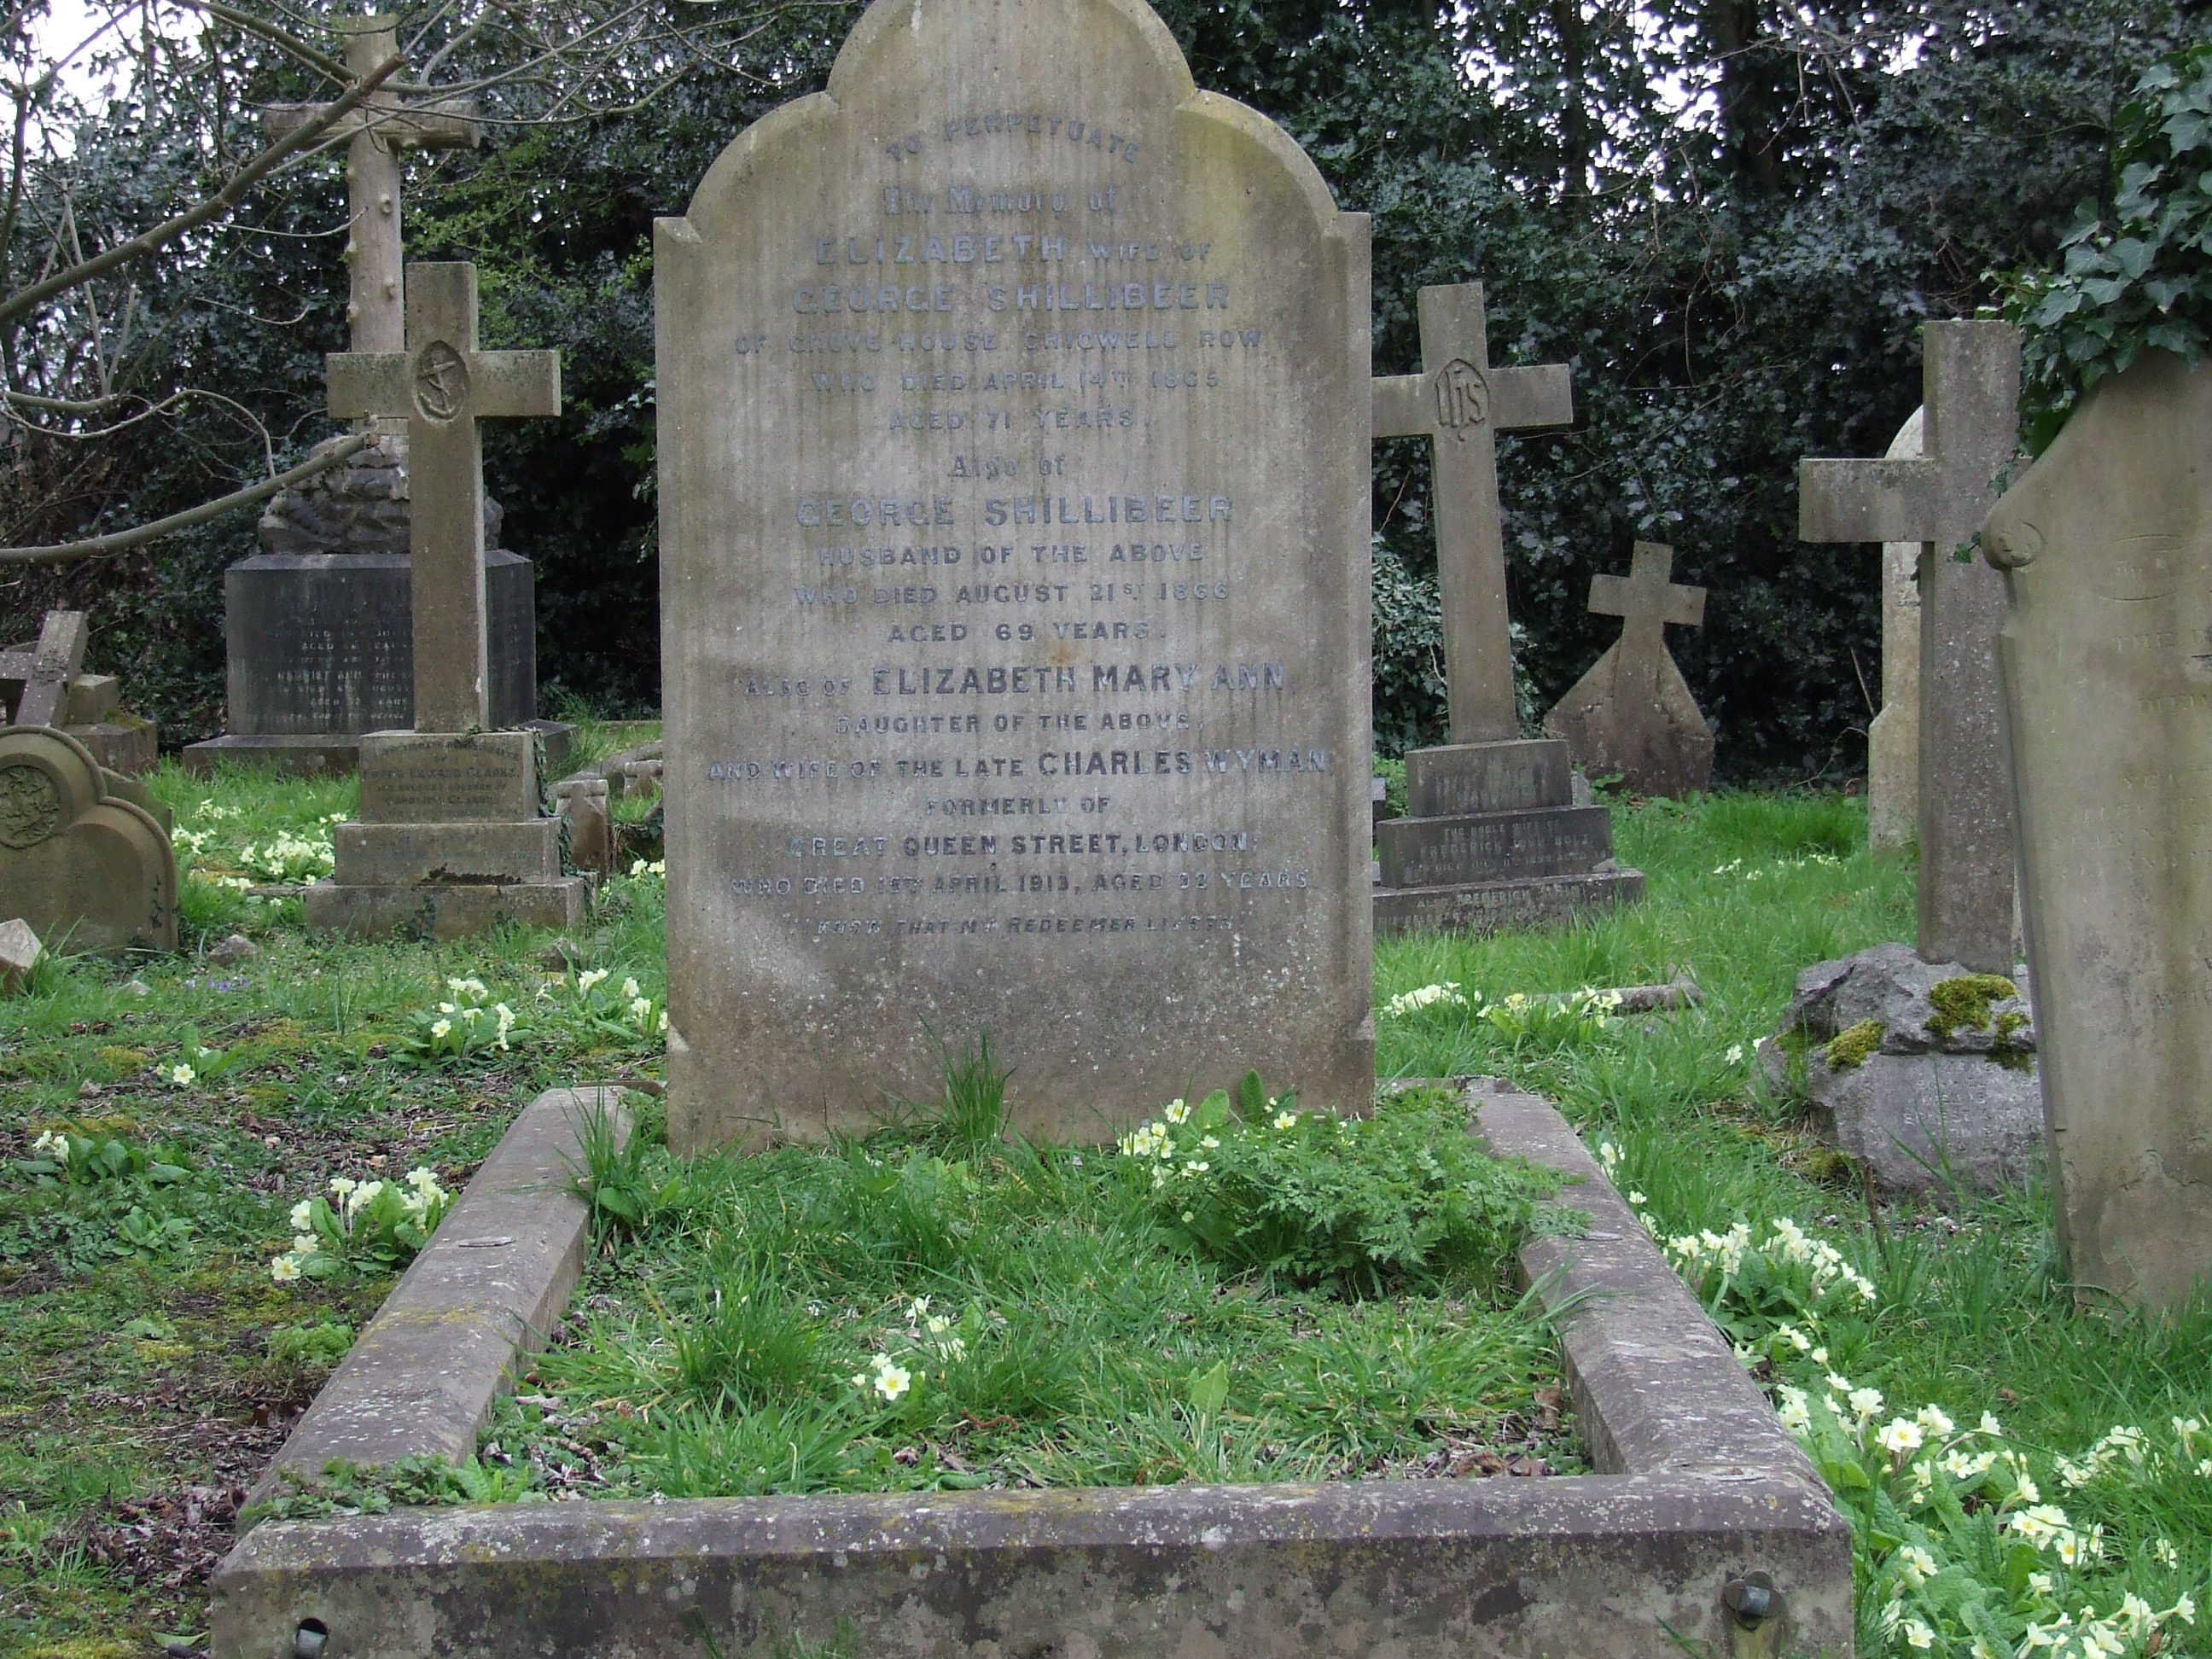 The George Shillibeer grave Chigwell